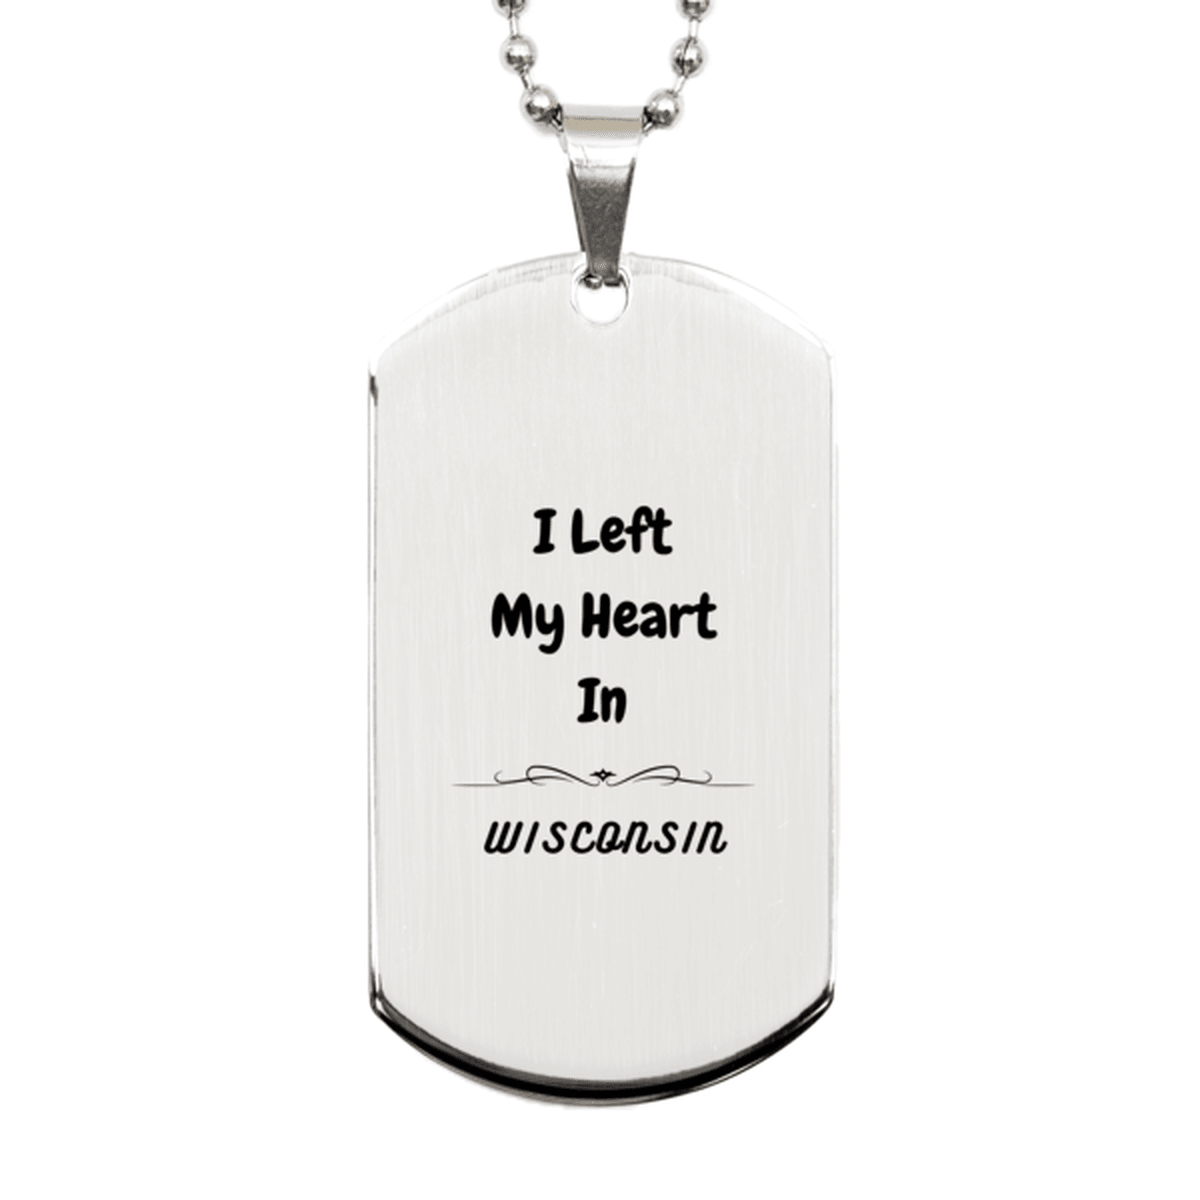 I Left My Heart In Wisconsin Gifts, Meaningful Wisconsin State for Friends, Men, Women. Silver Dog Tag for Wisconsin People - Mallard Moon Gift Shop